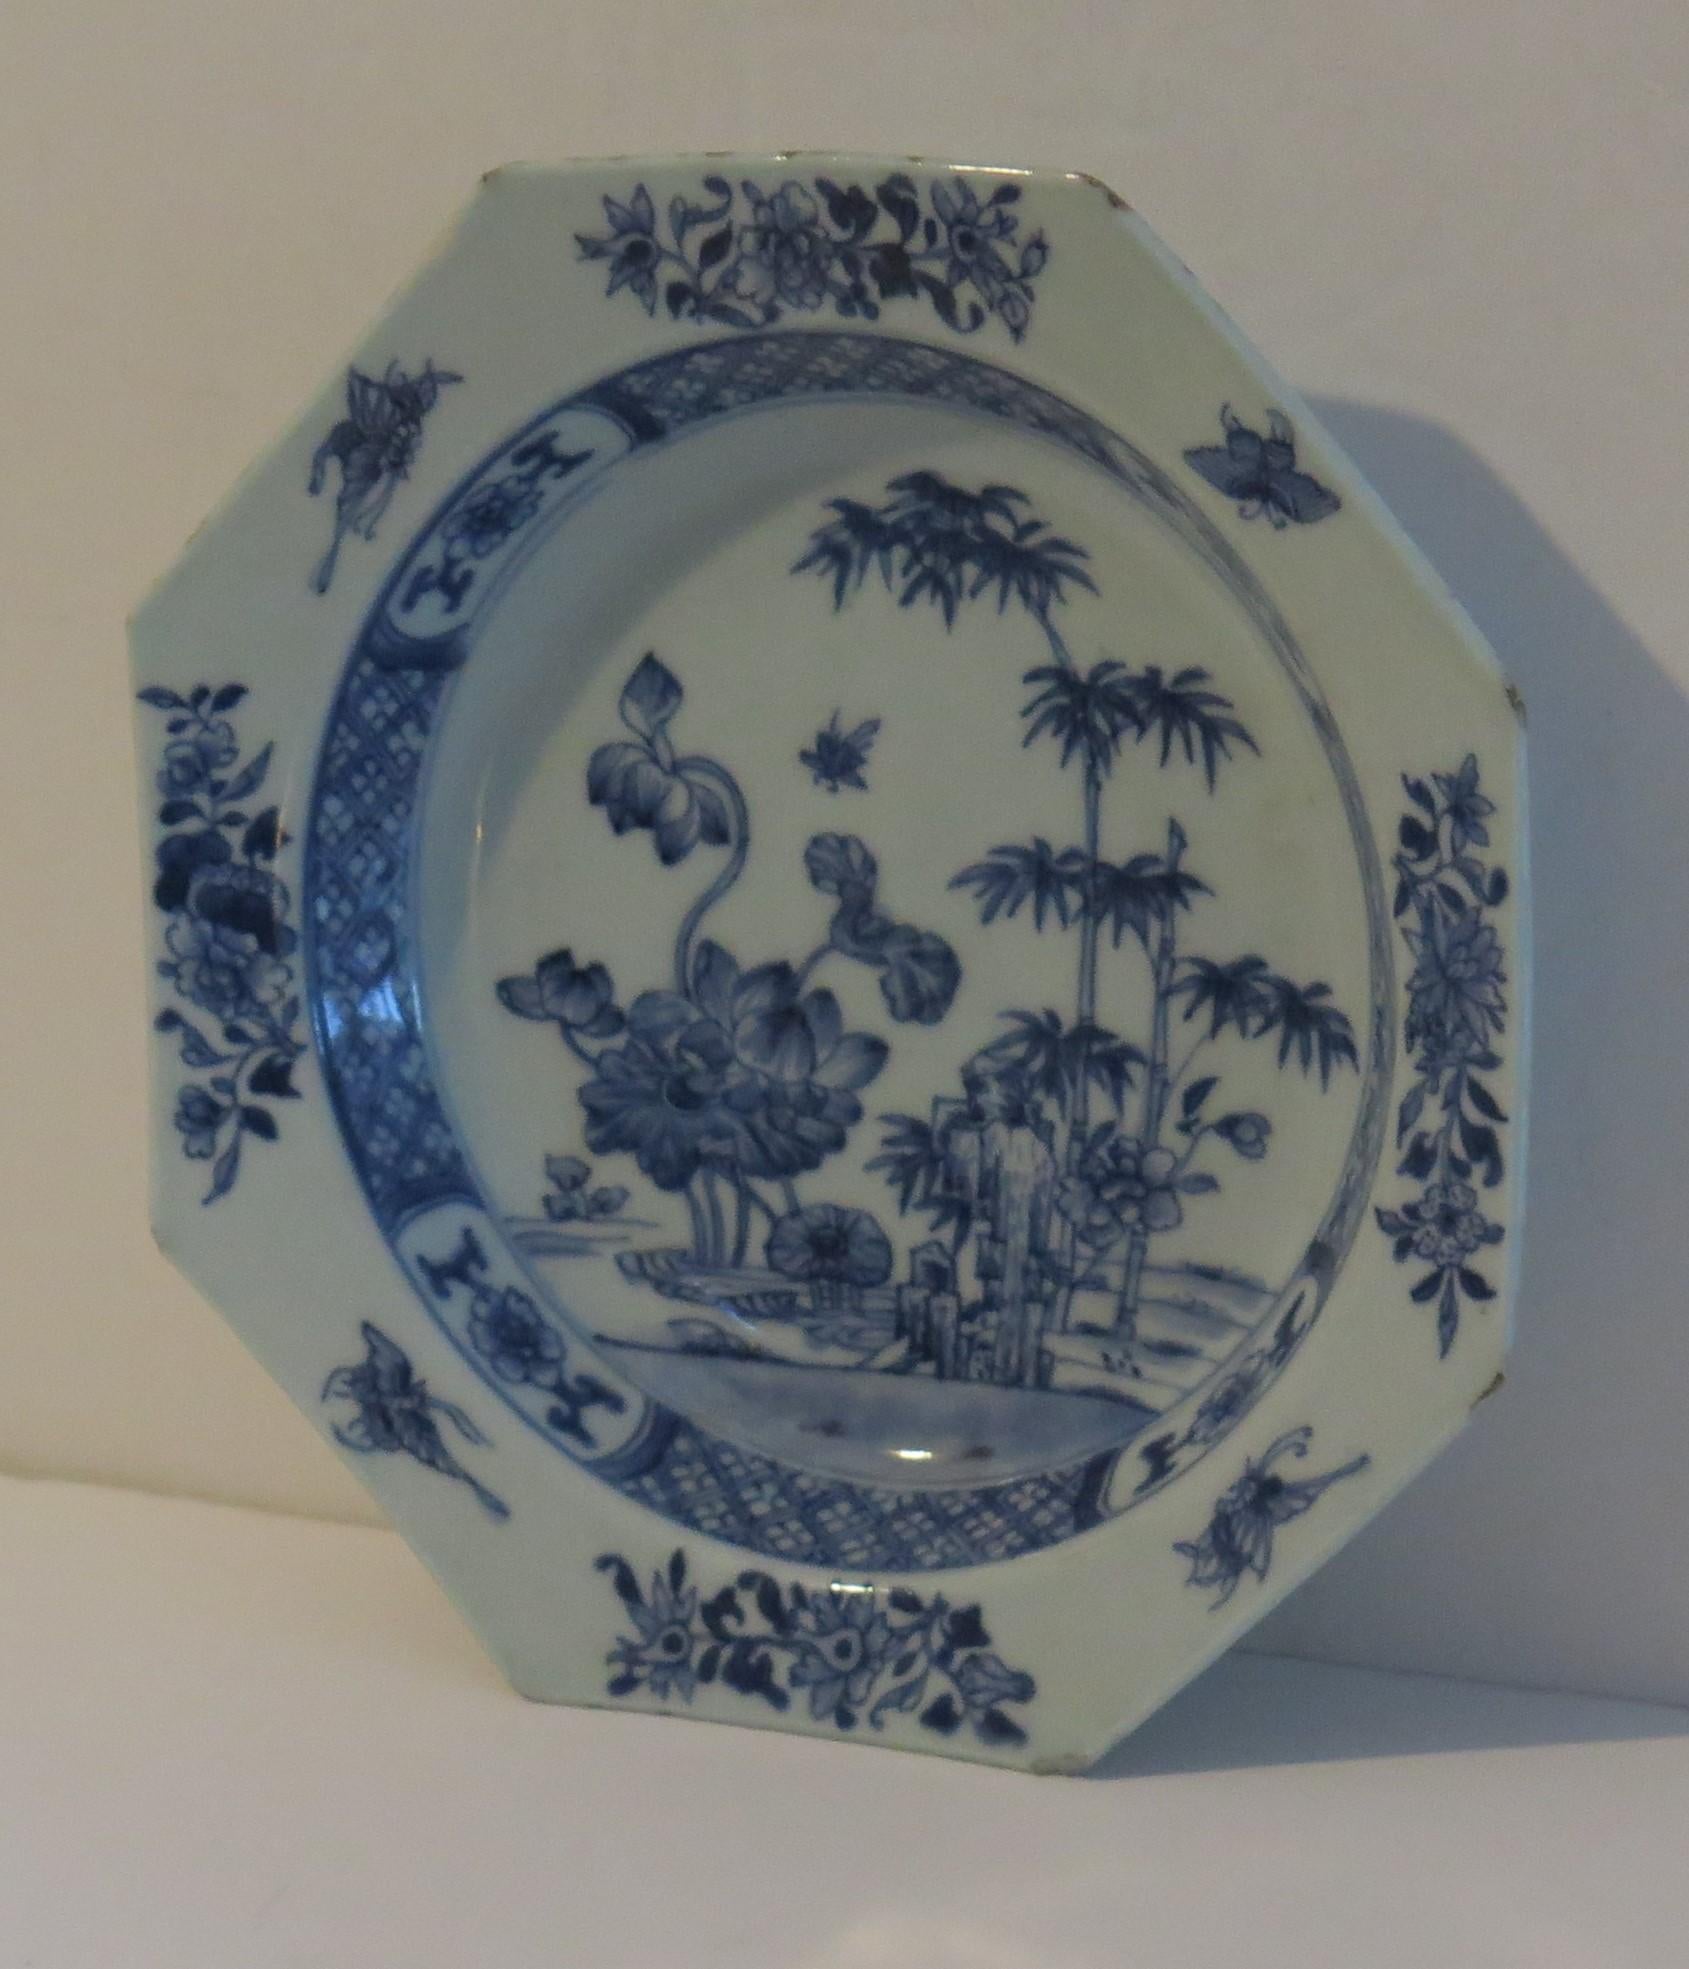 Hand-Painted Chinese Export Soup or Deep Plate Canton Blue & White Porcelain, Qing circa 1770